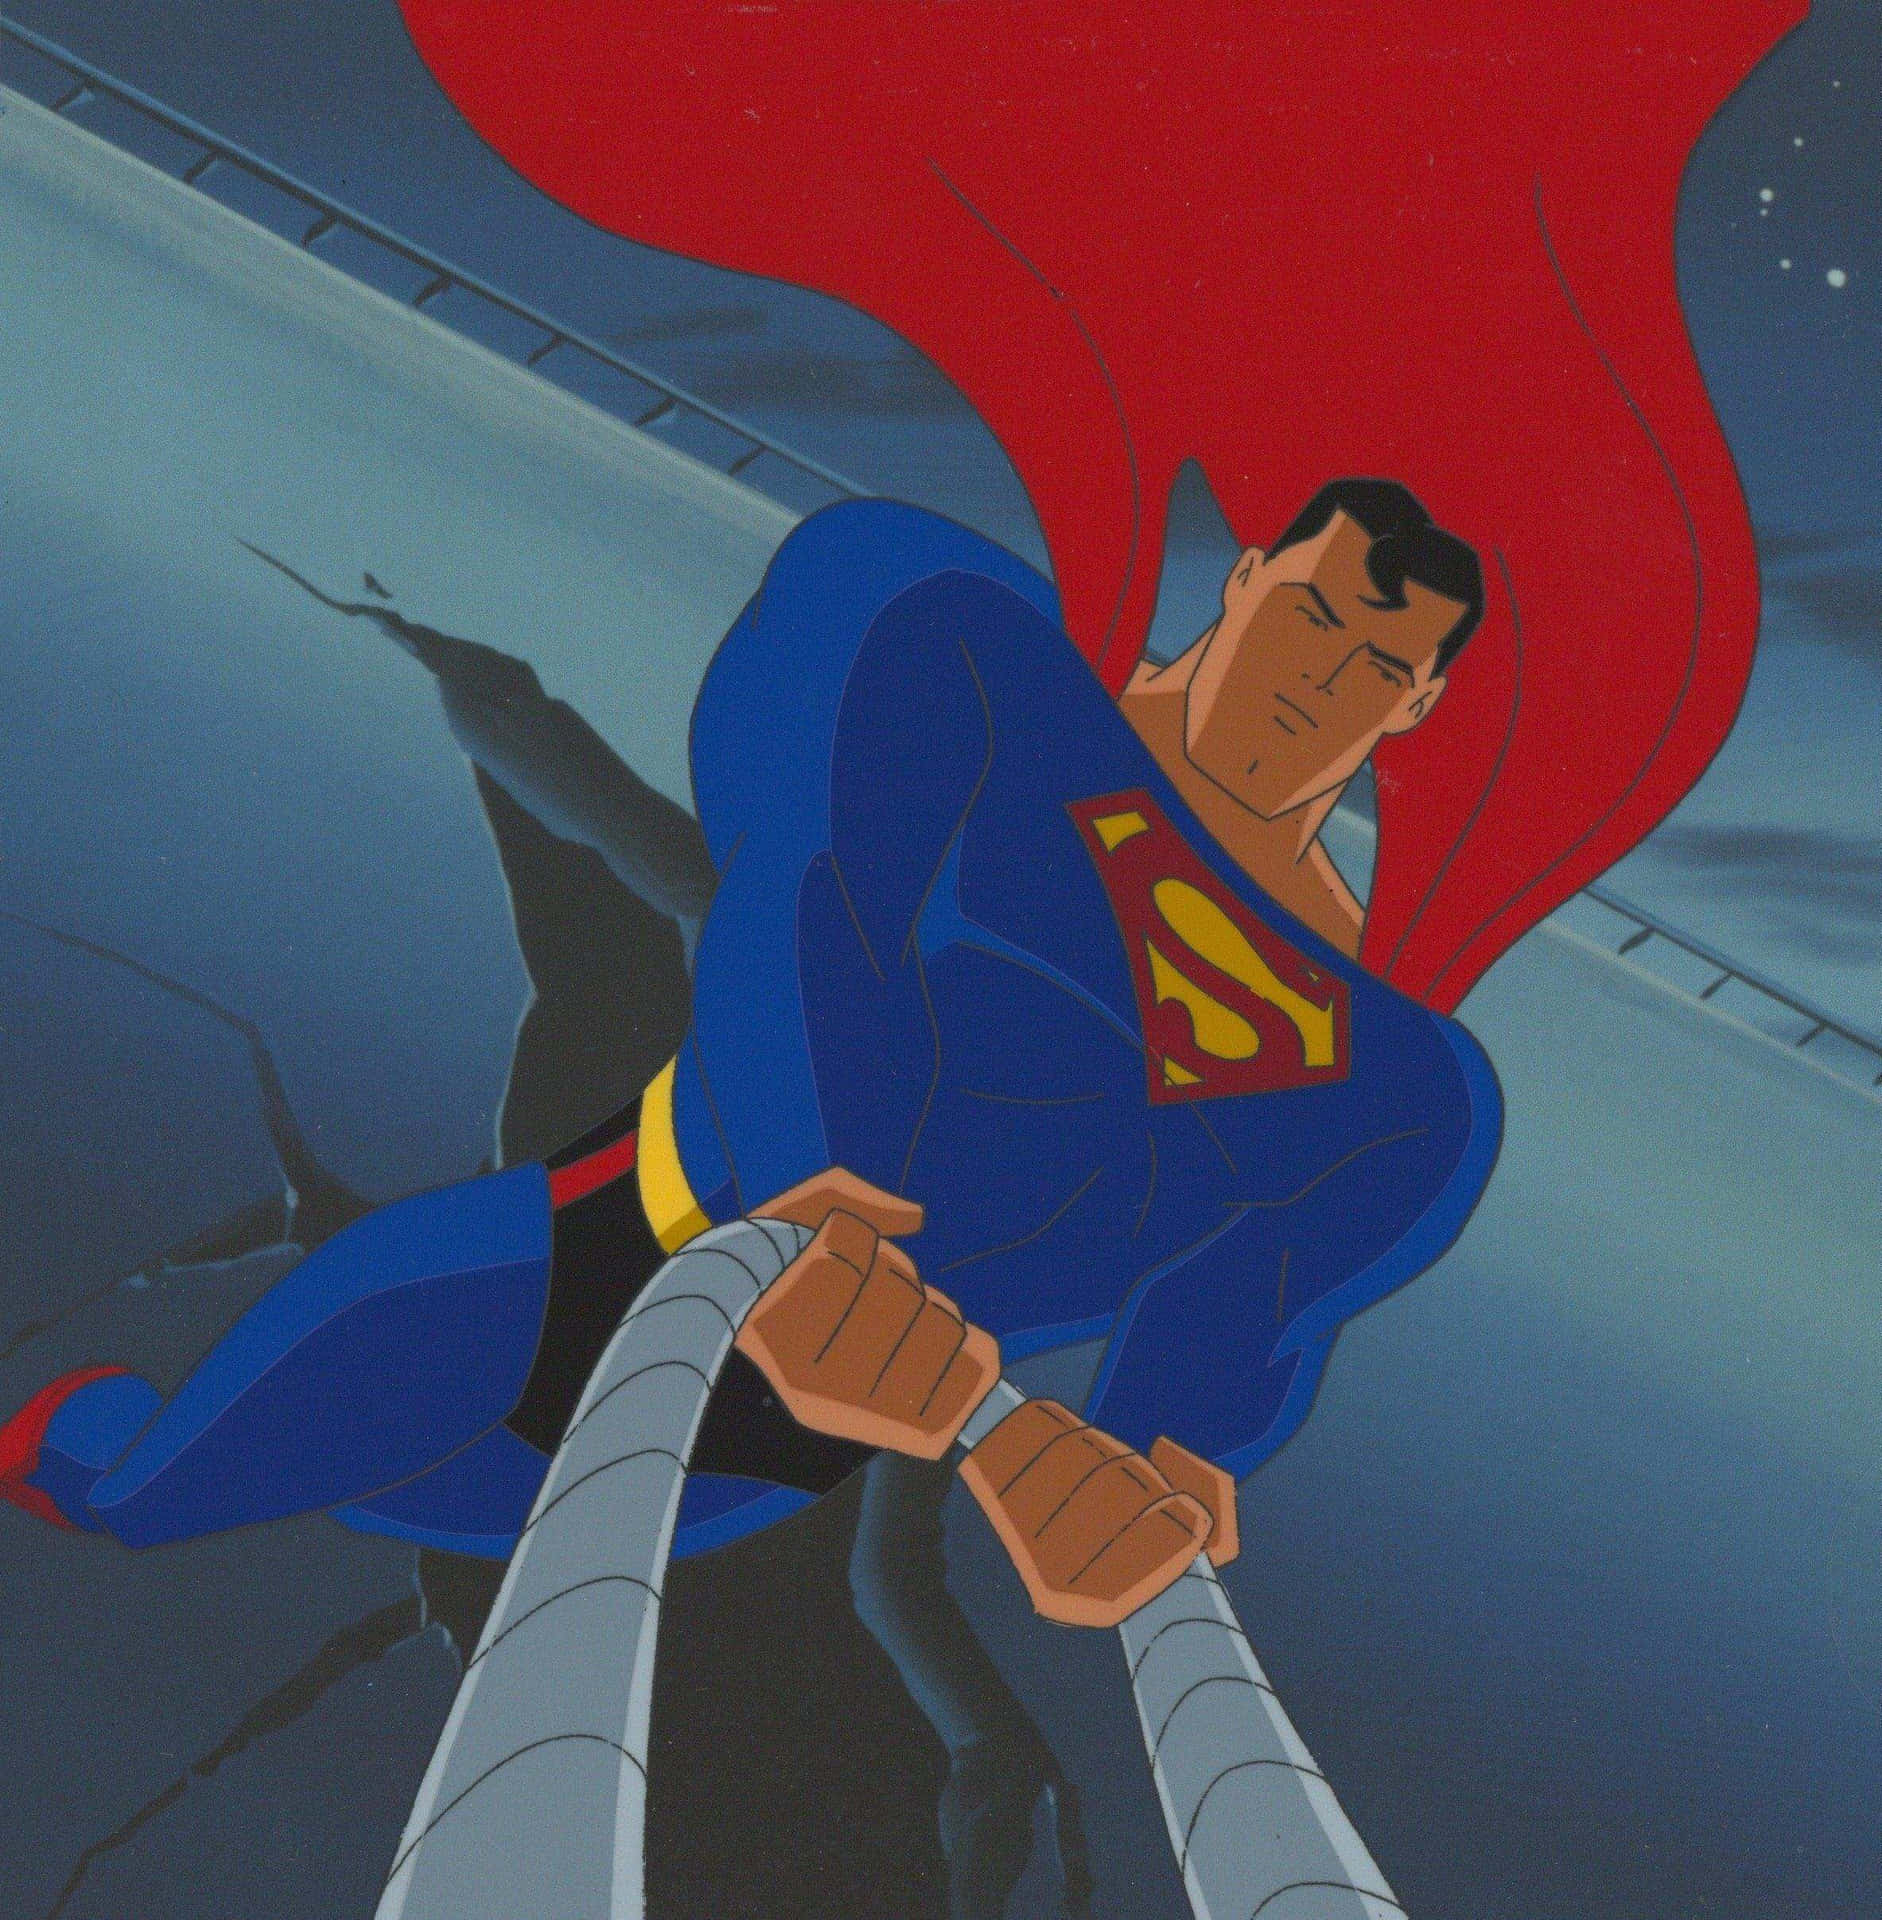 Superman flying high over Metropolis in Superman: The Animated Series Wallpaper